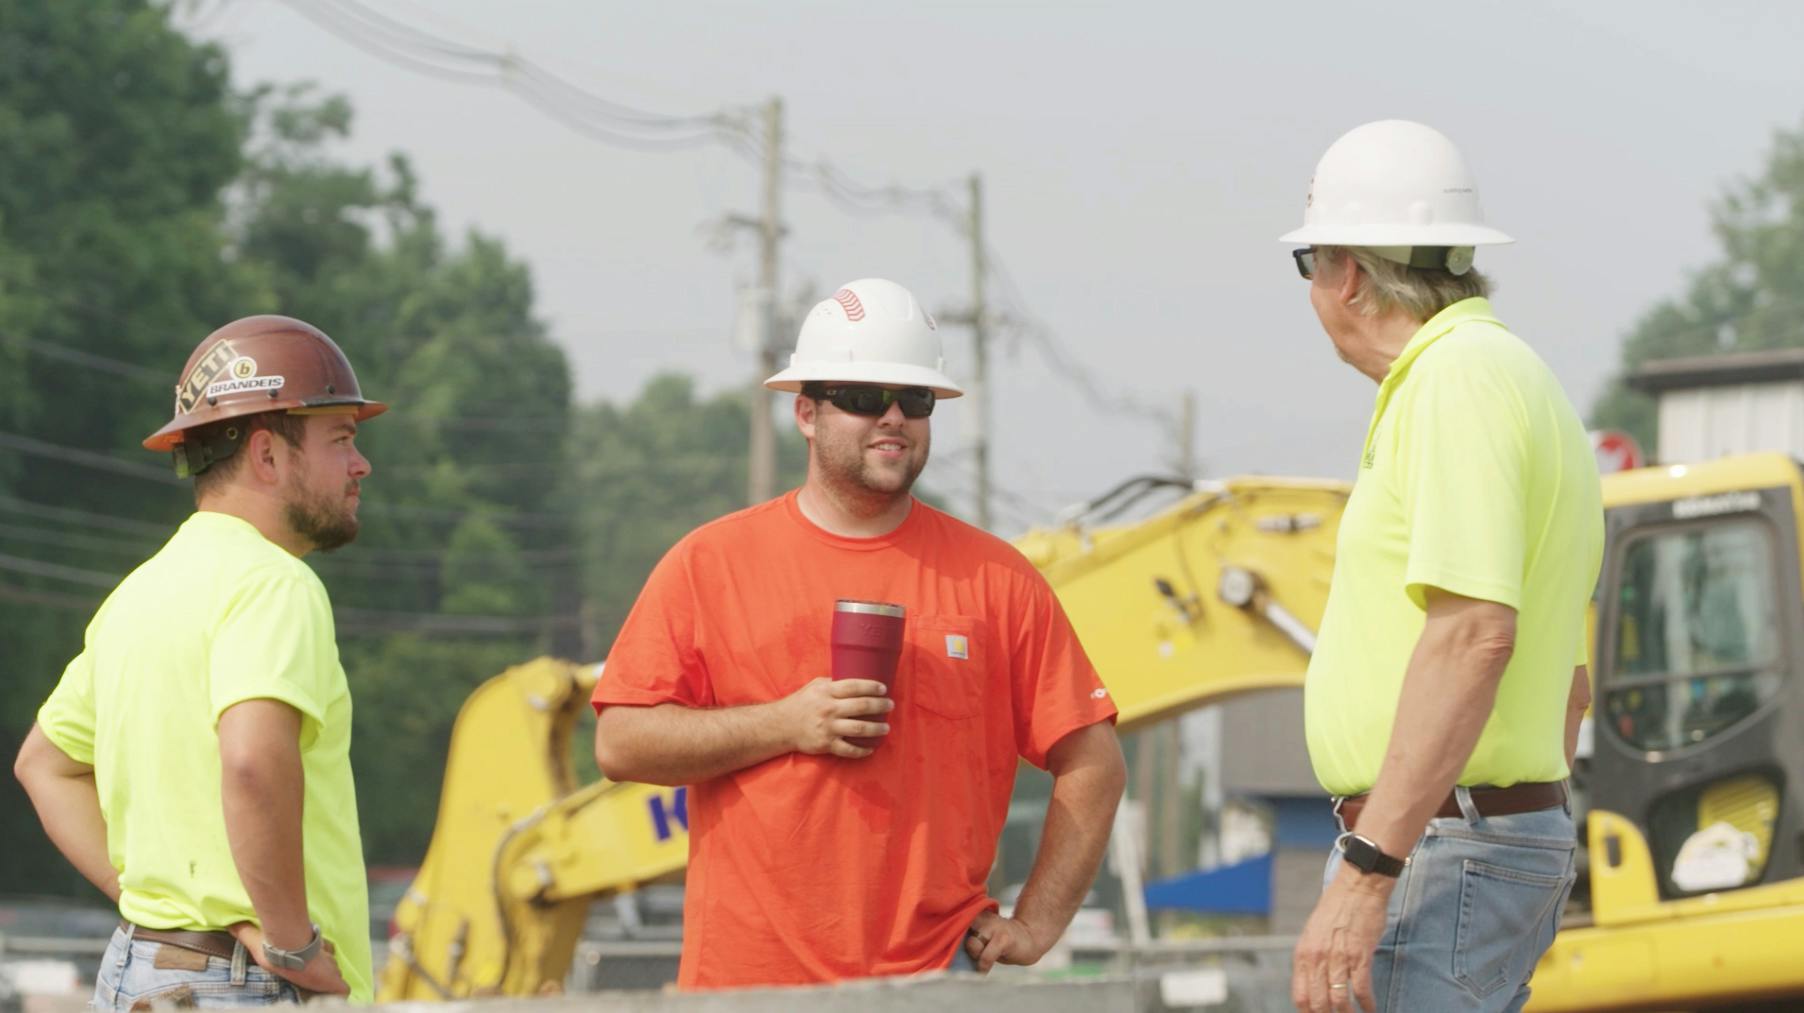 Three workers on break at a job site